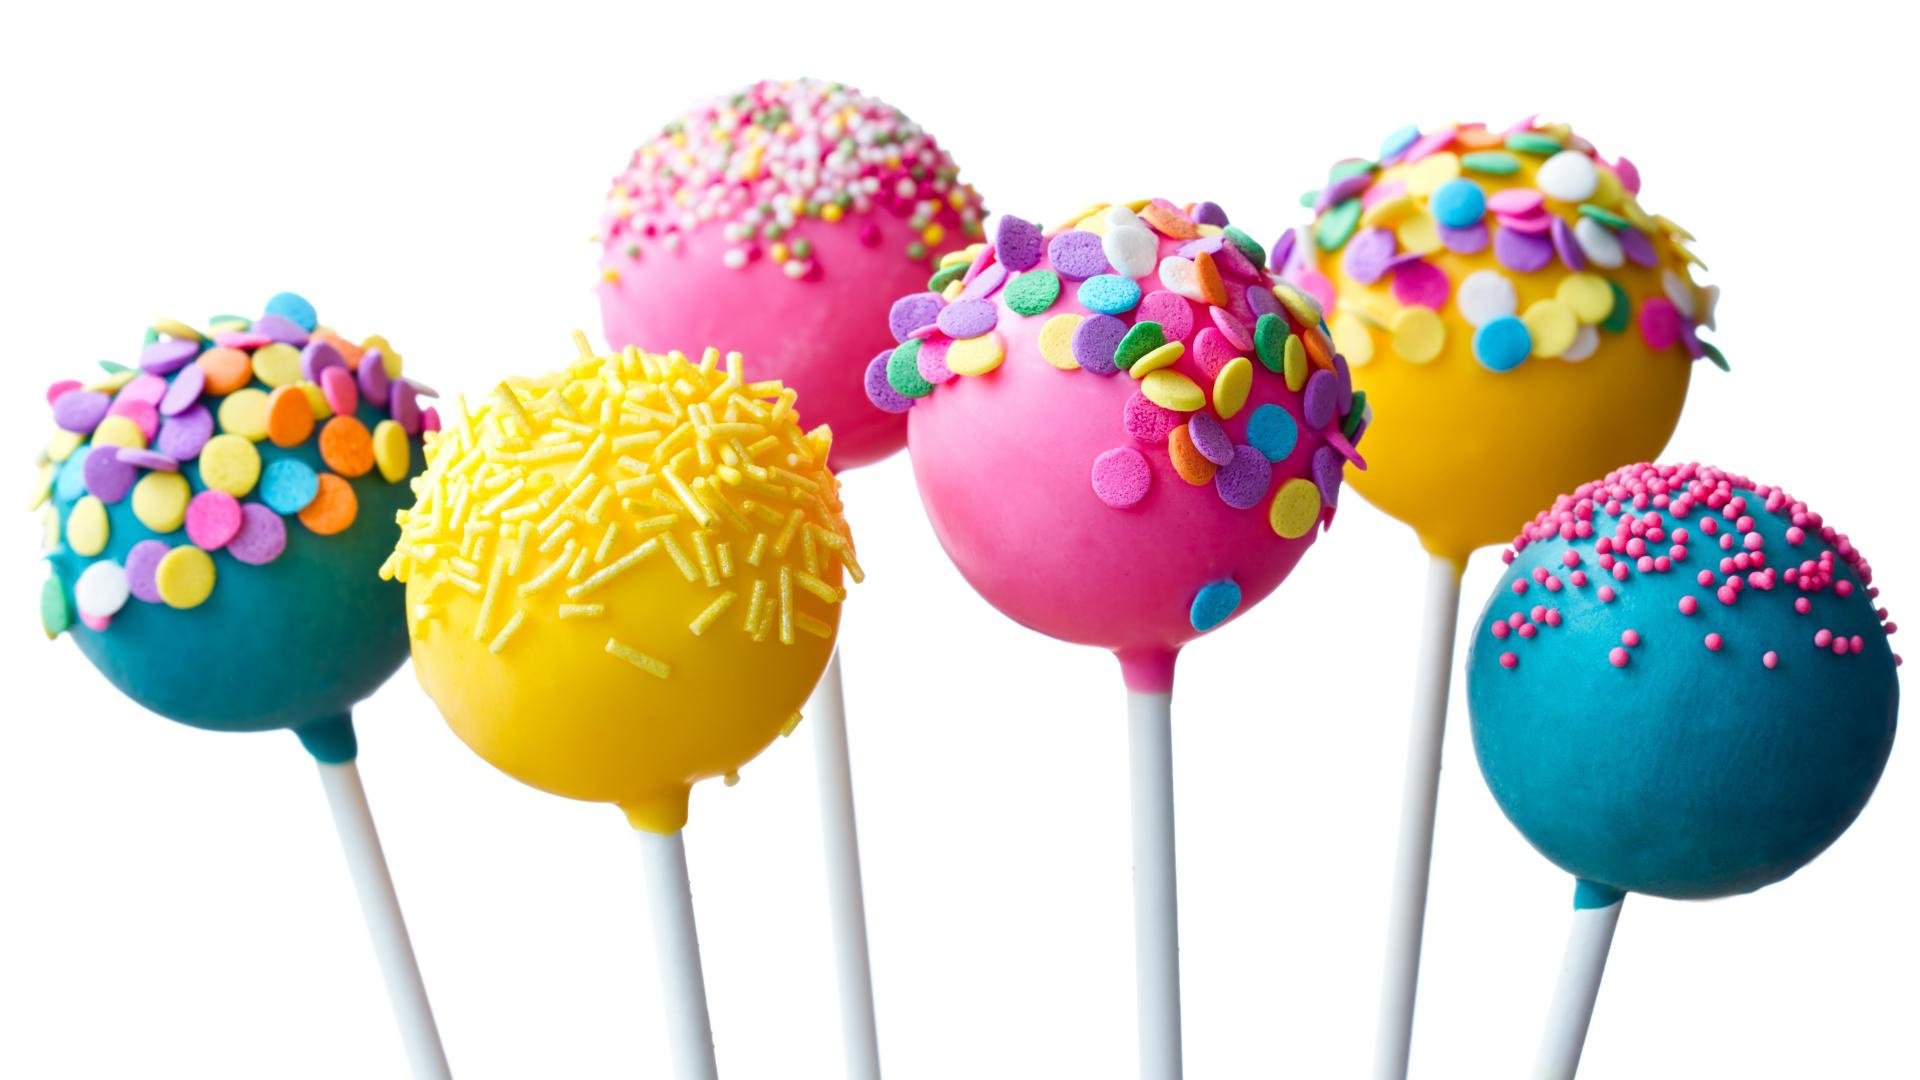 Android 5.0 Lollipop Reported Laggy, Fix Incoming